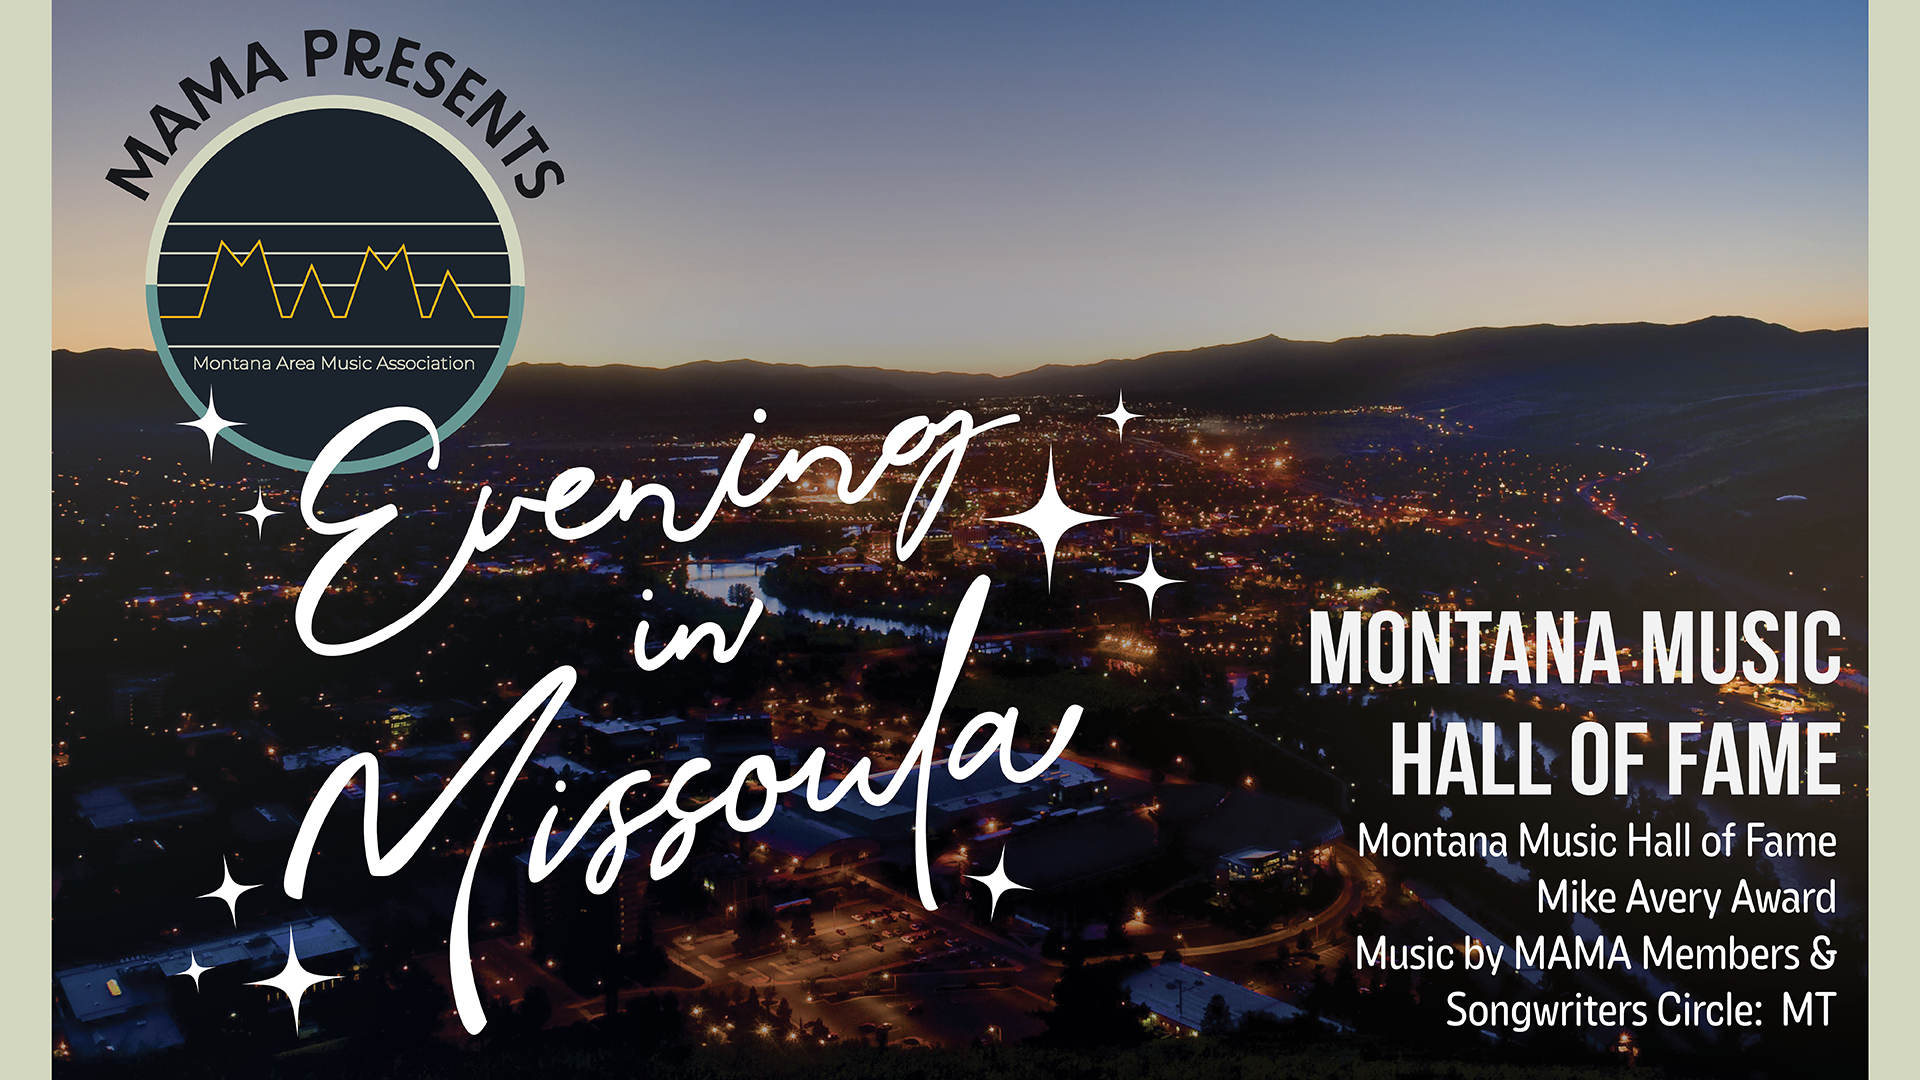 MAMA presents "Evening in Missoula" Inaugural Gala for the Montana Music Hall of Fame, March 31 at Zootown Arts Community Center in Missoula